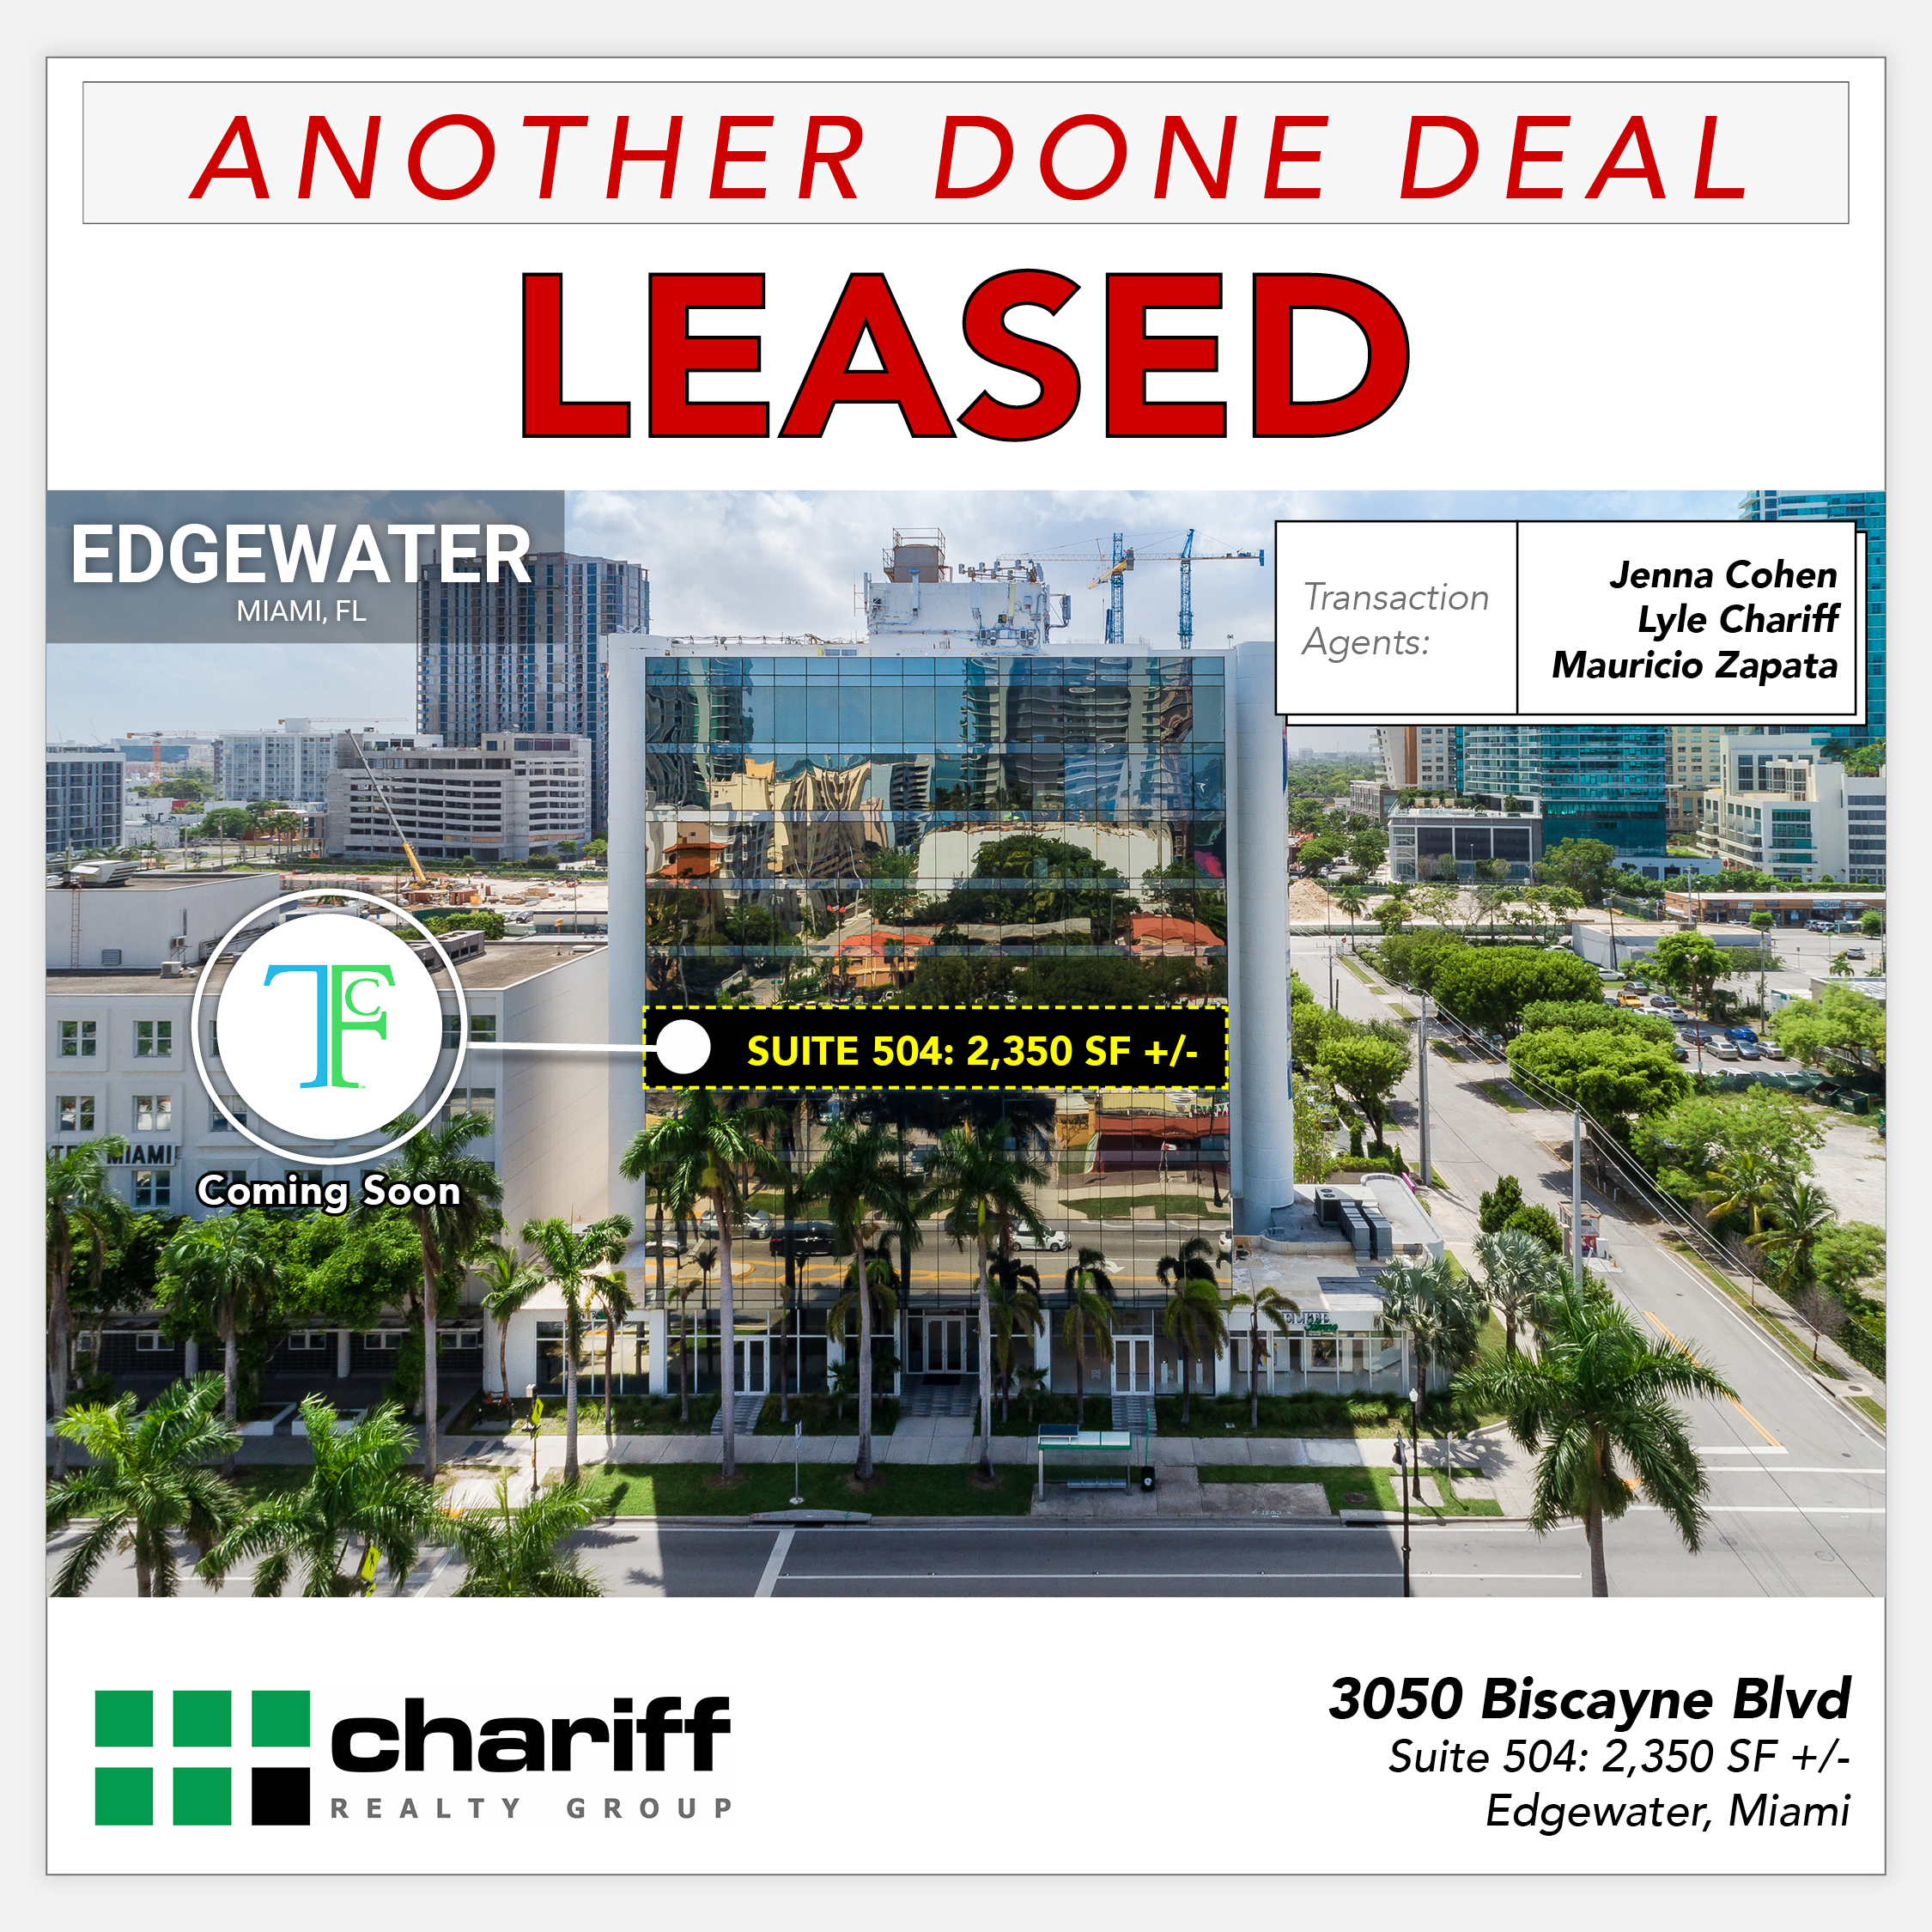 3050 Biscayne Blvd - Another Done Deal - Leased - Edgewater - Miami-Florida-33137-Chariff Realty Group